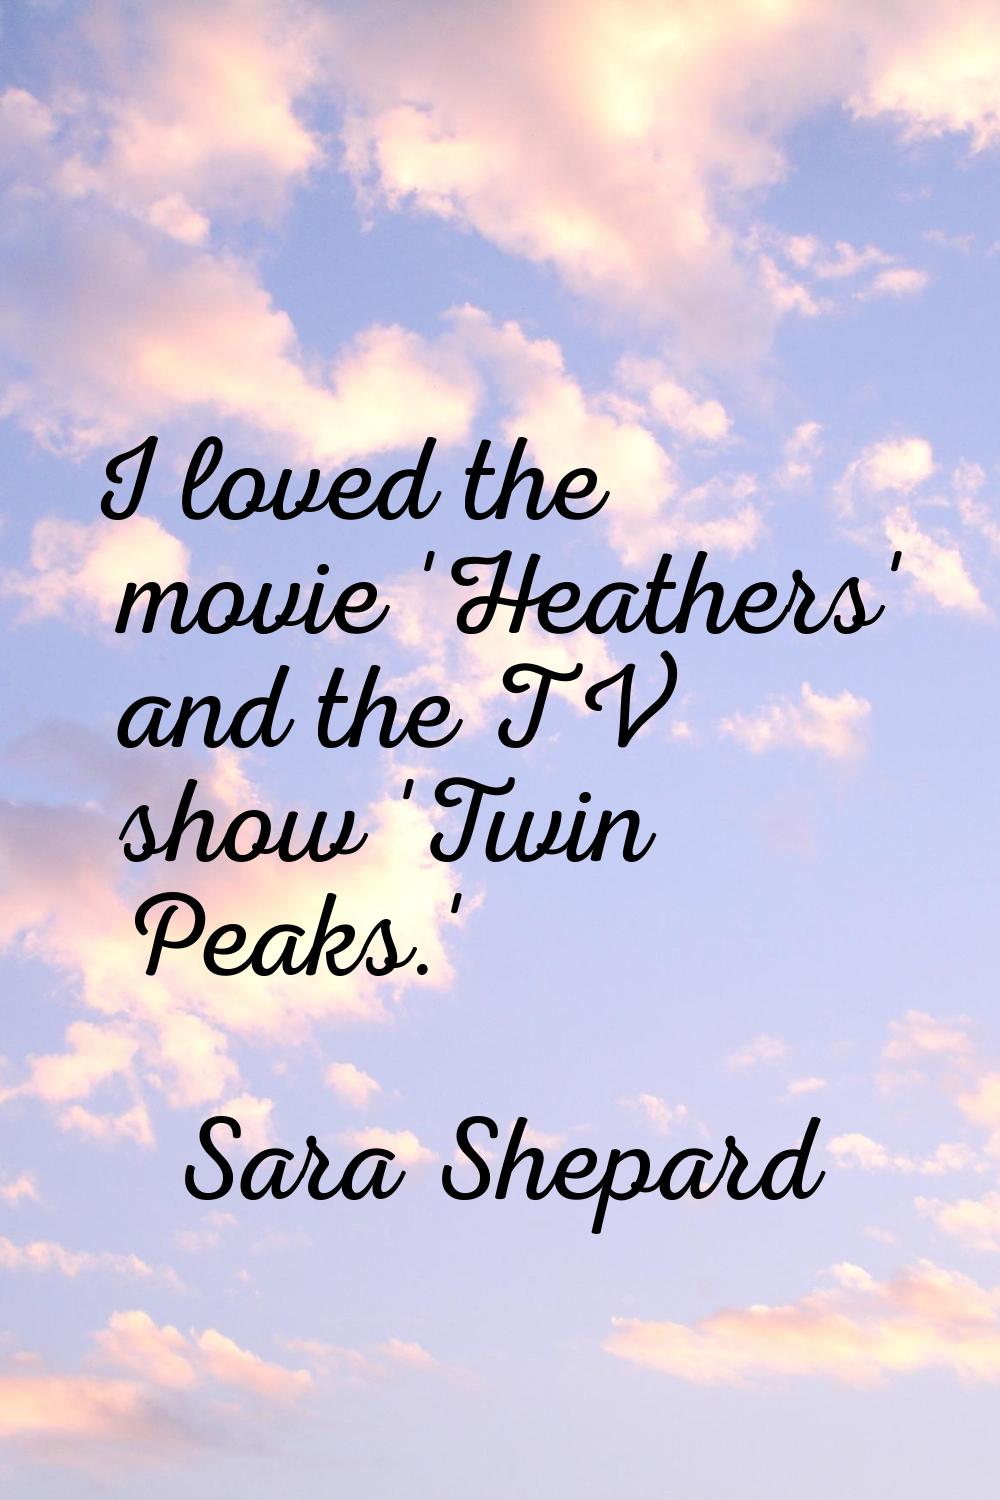 I loved the movie 'Heathers' and the TV show 'Twin Peaks.'